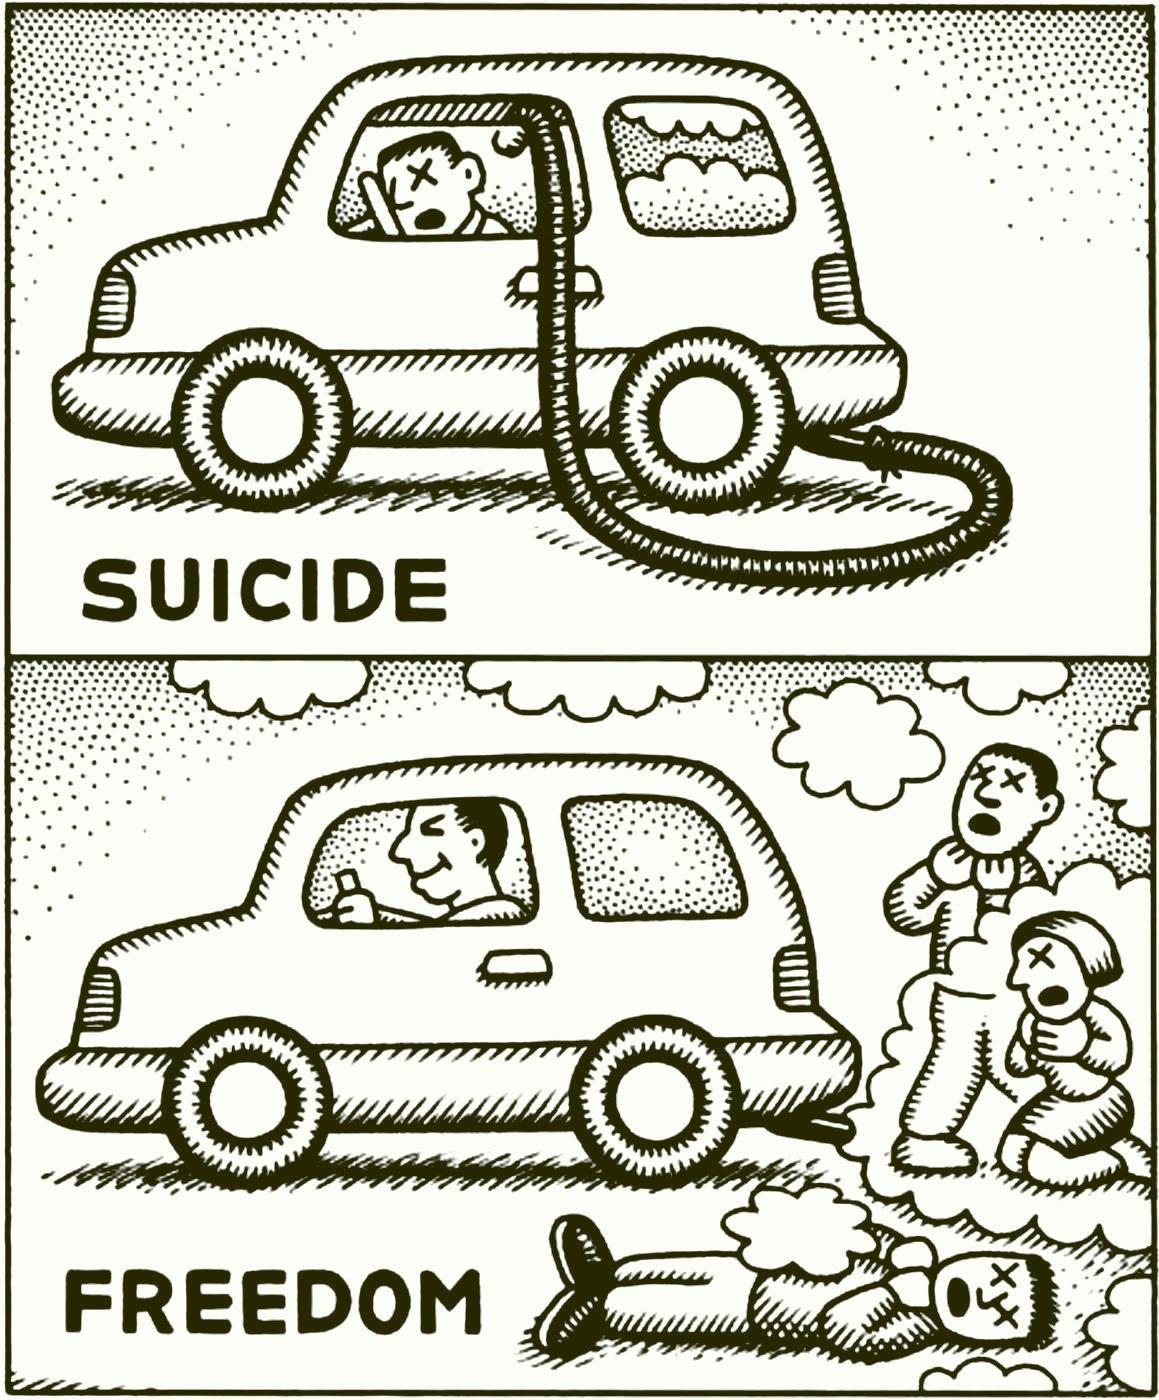 Suicide or Freedom?